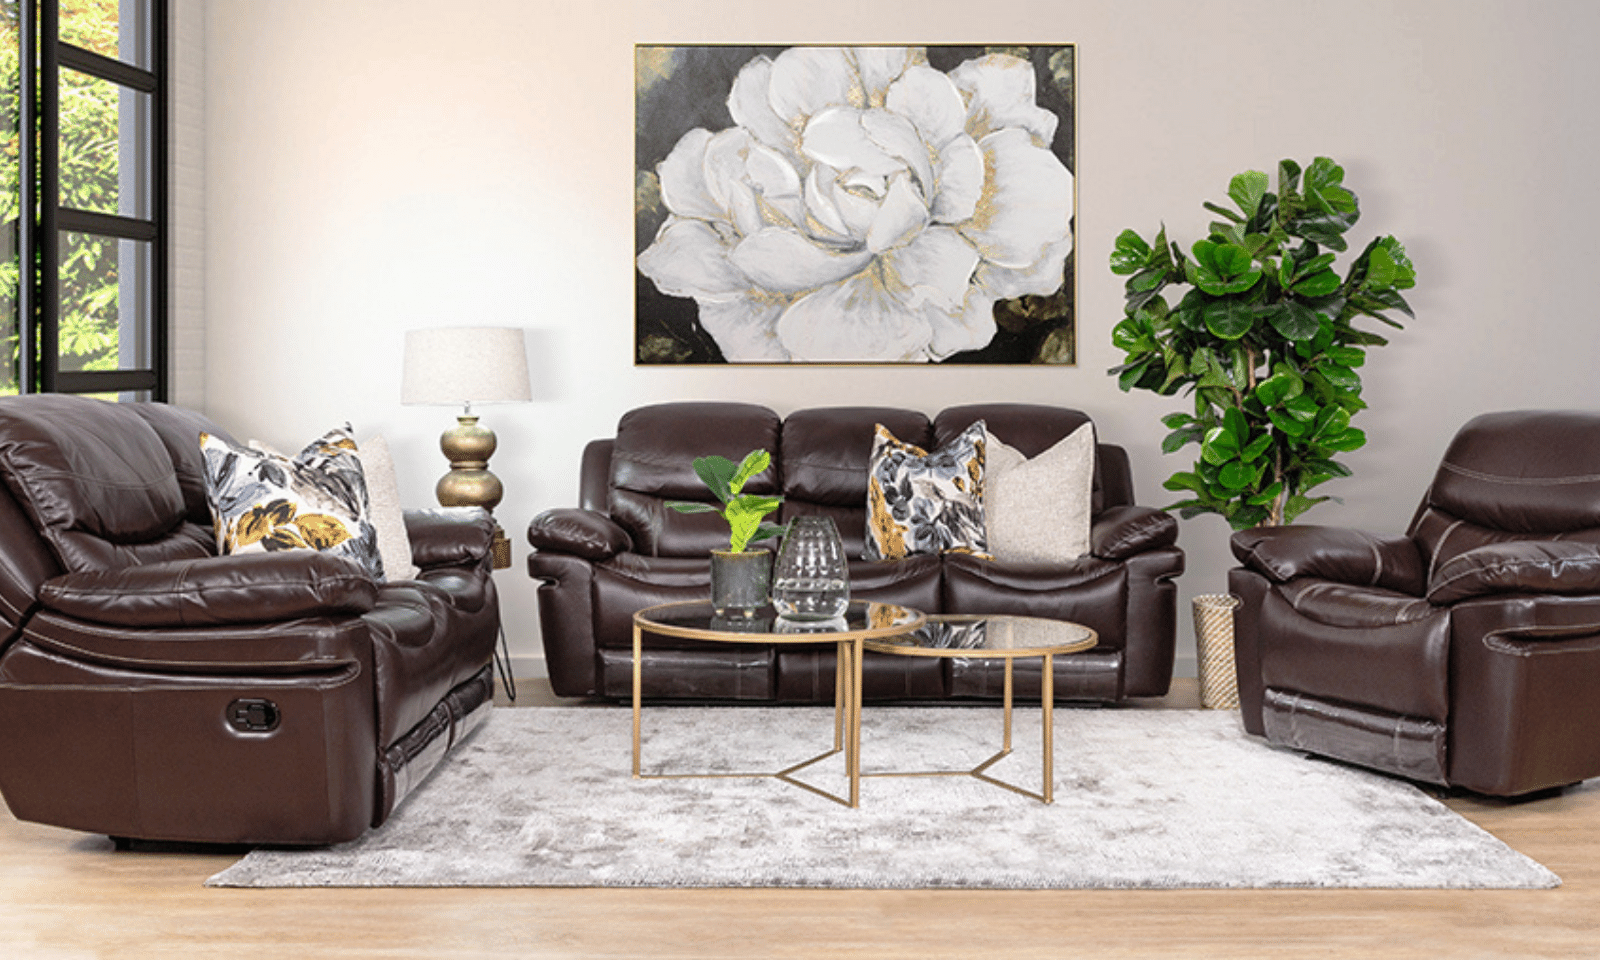 WHEN SHOULD YOU GET A SECTIONAL SOFA VS A SOFA SUITE